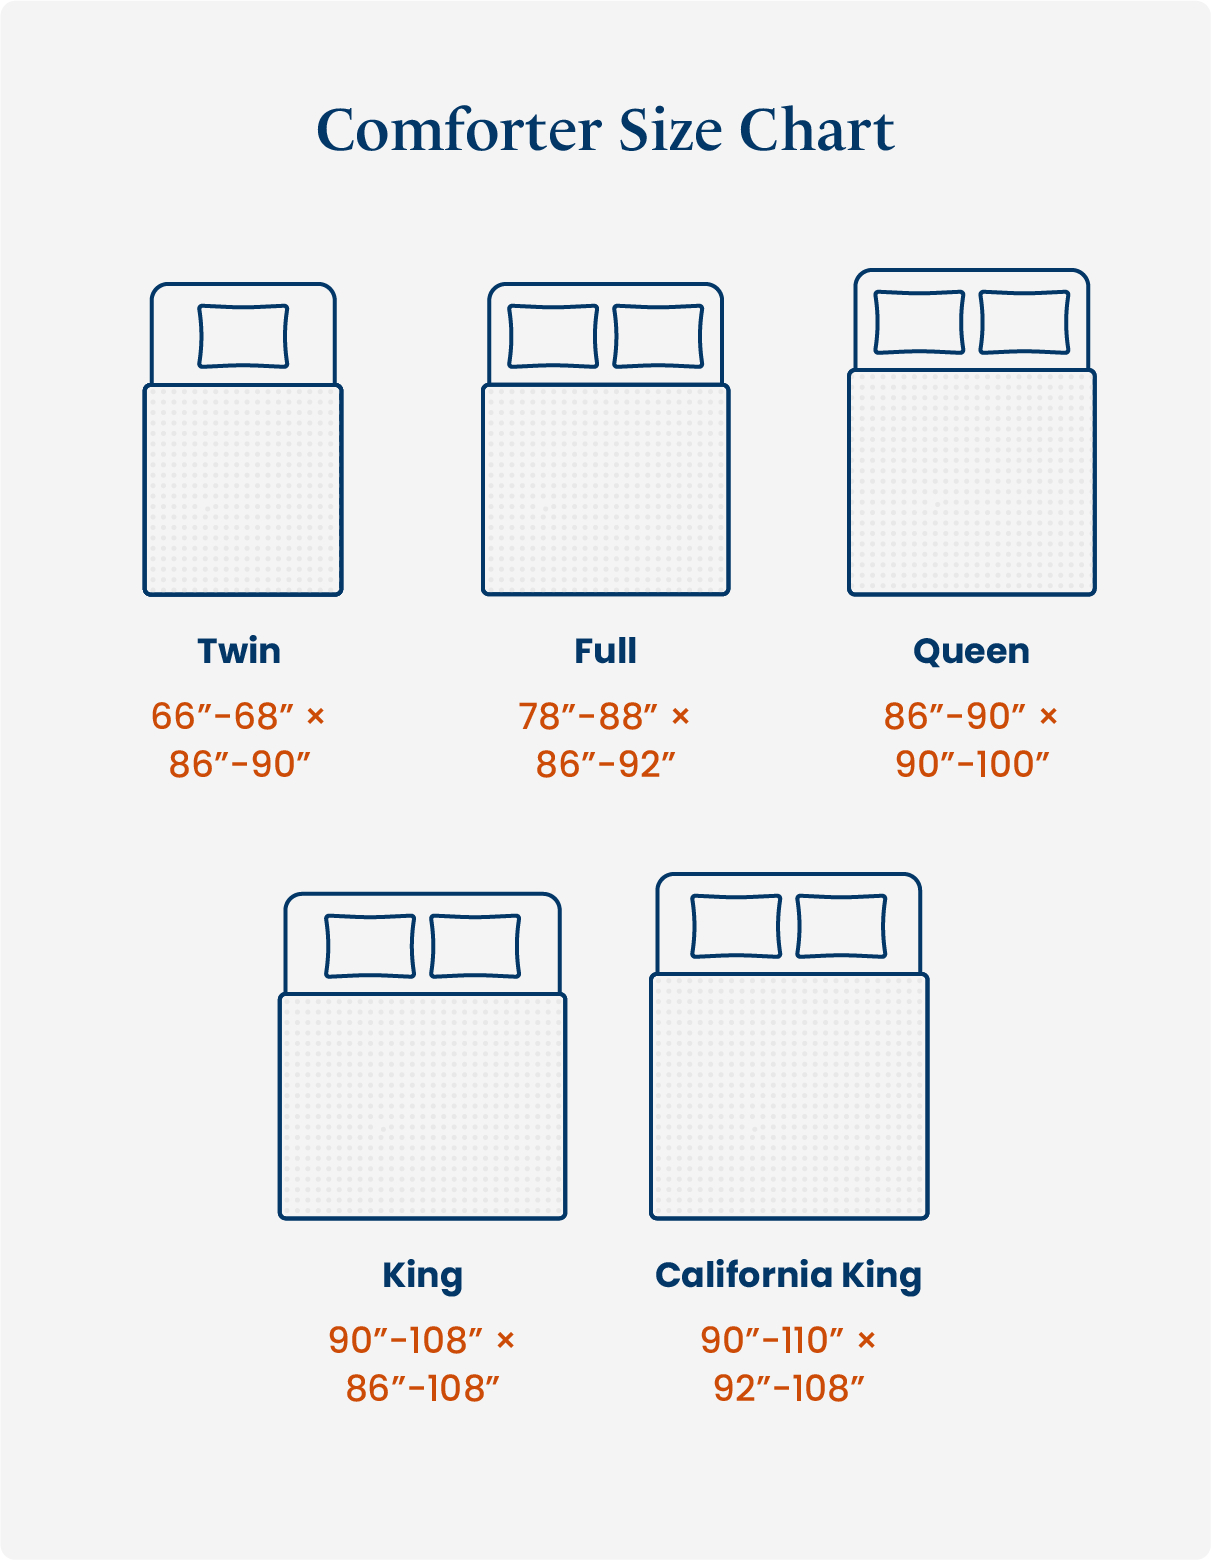 A chart showing the different sizes of mattresses to help people find the right size comforter.